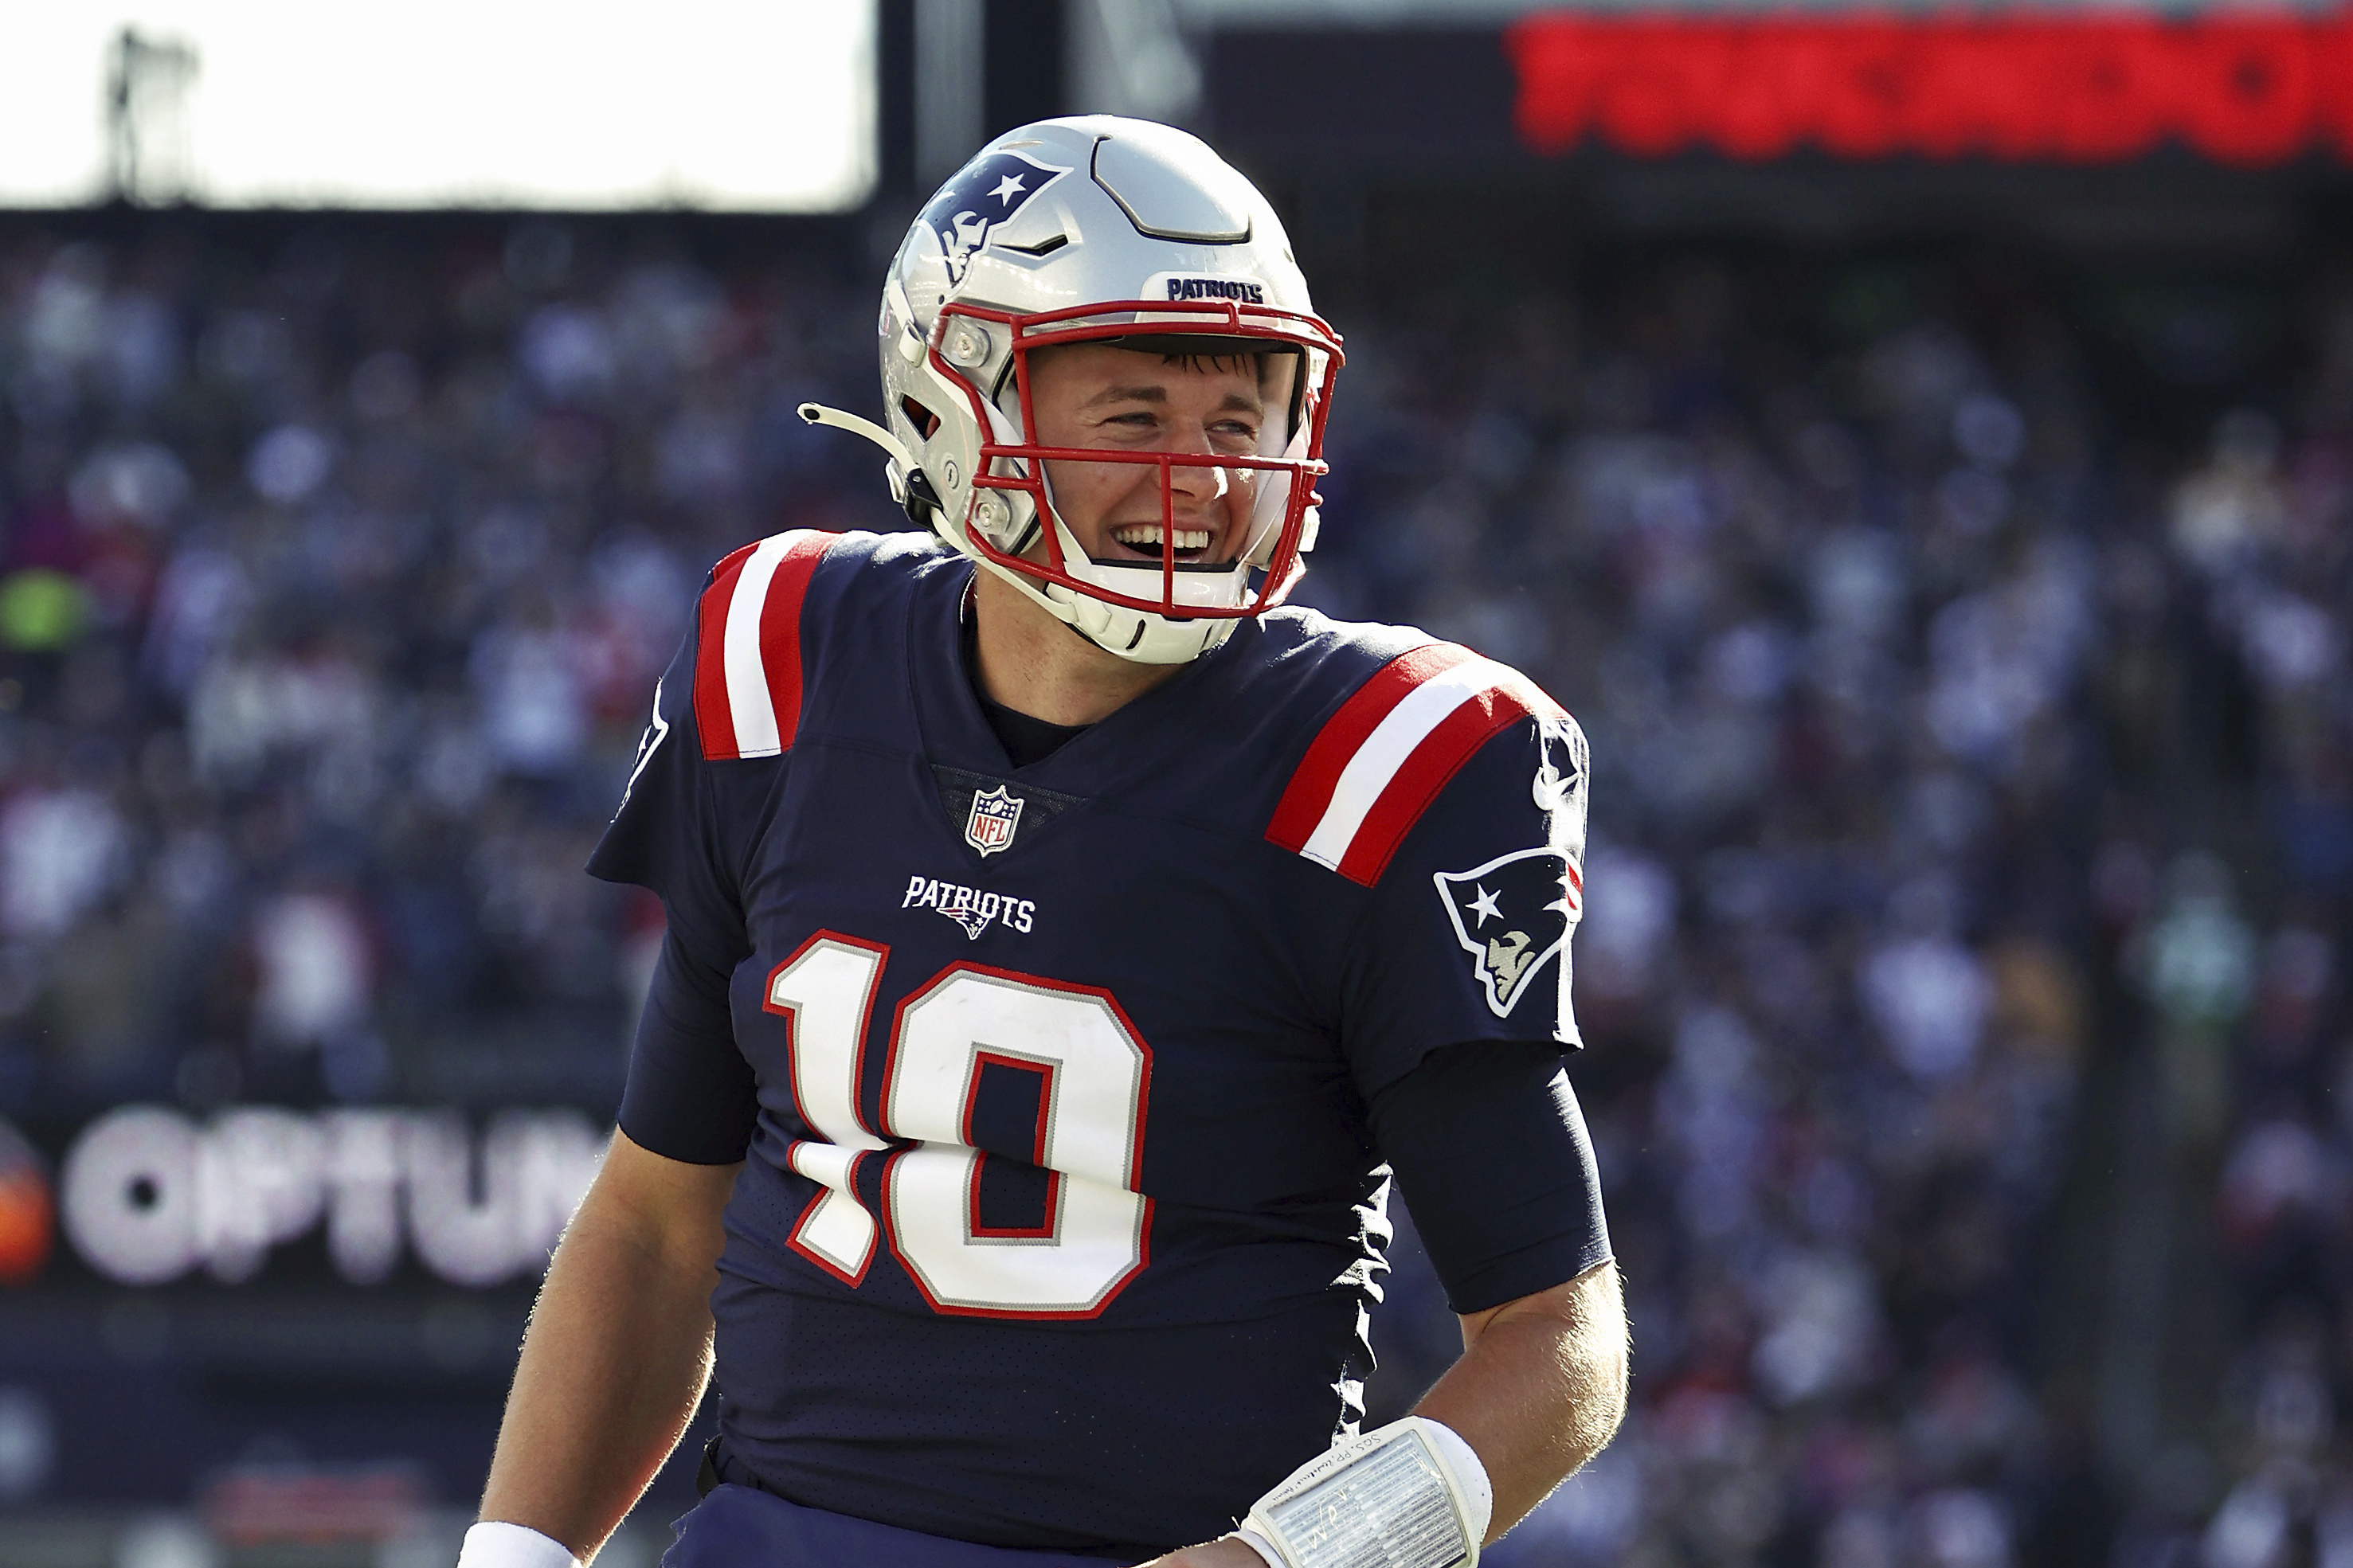 Patriots vs. Browns: Free live stream, start time, TV, how to